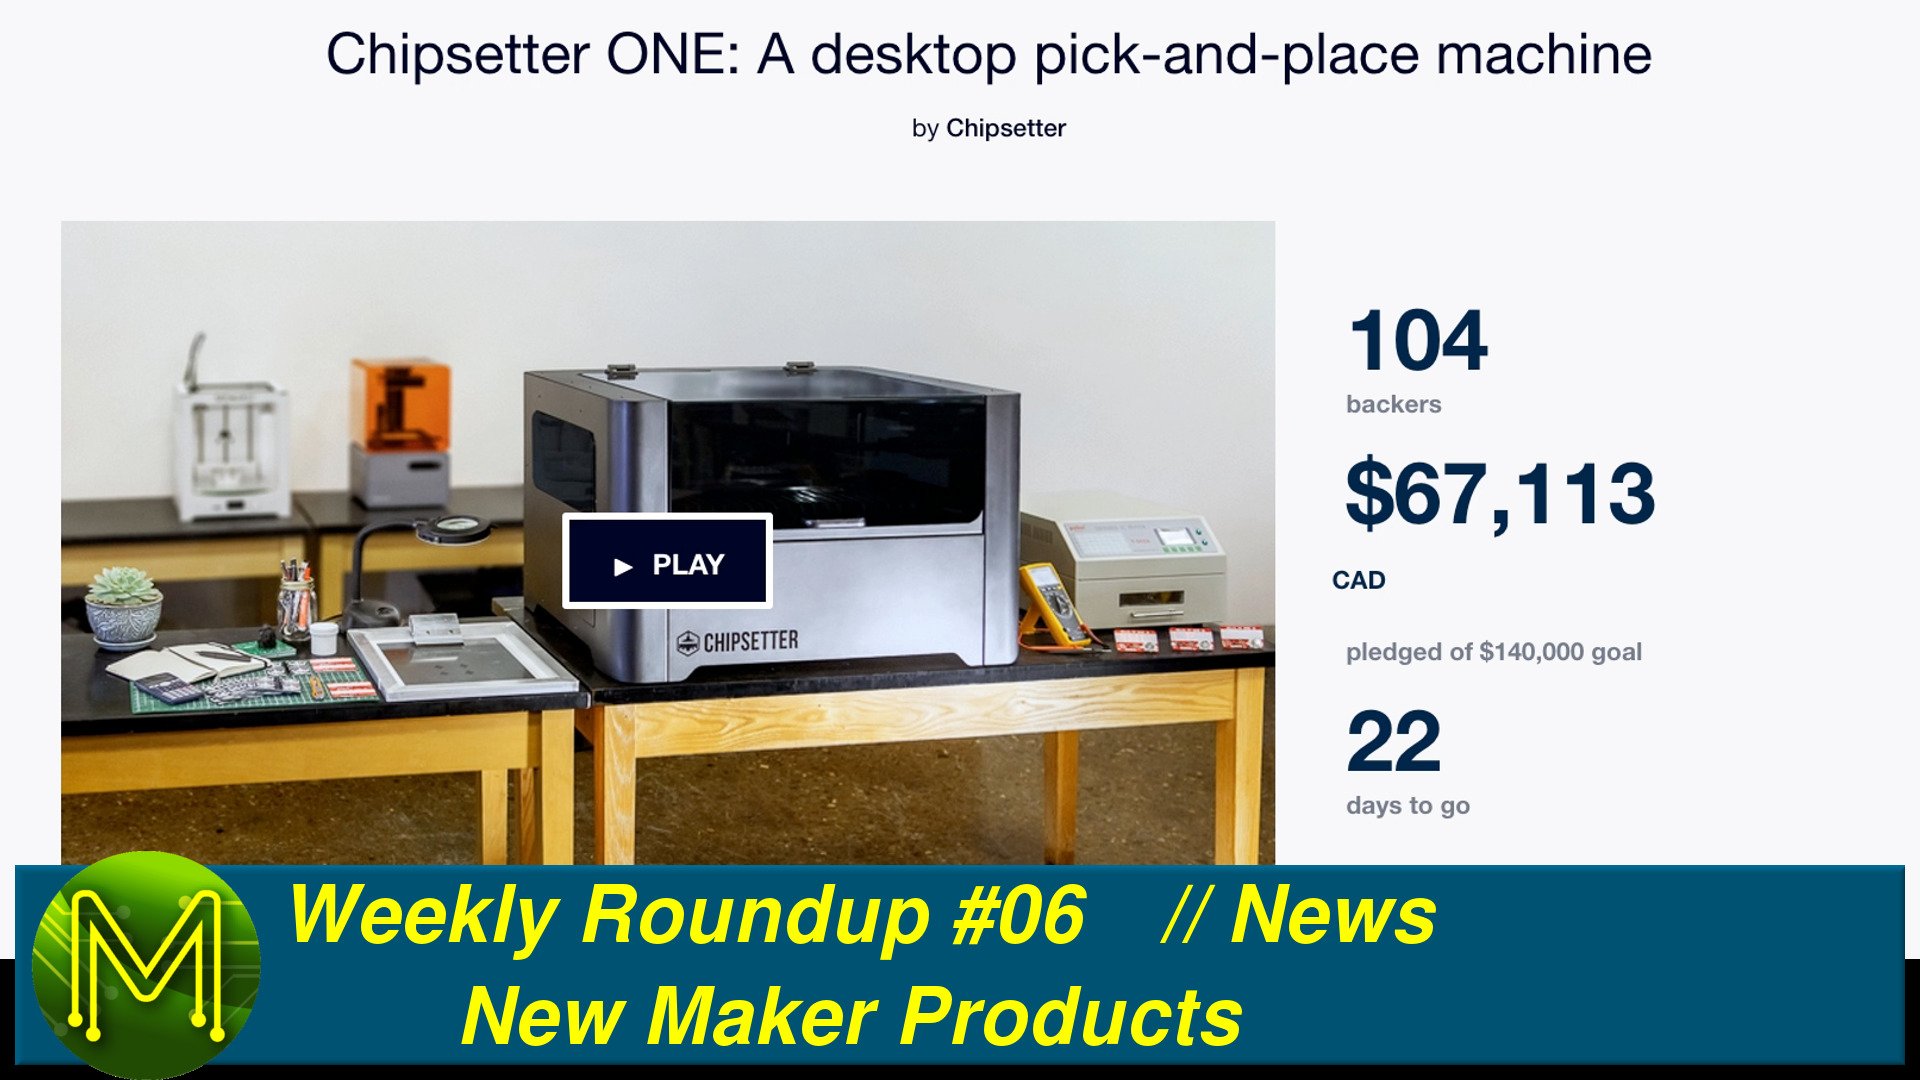 Weekly Roundup #06 - New Maker Products